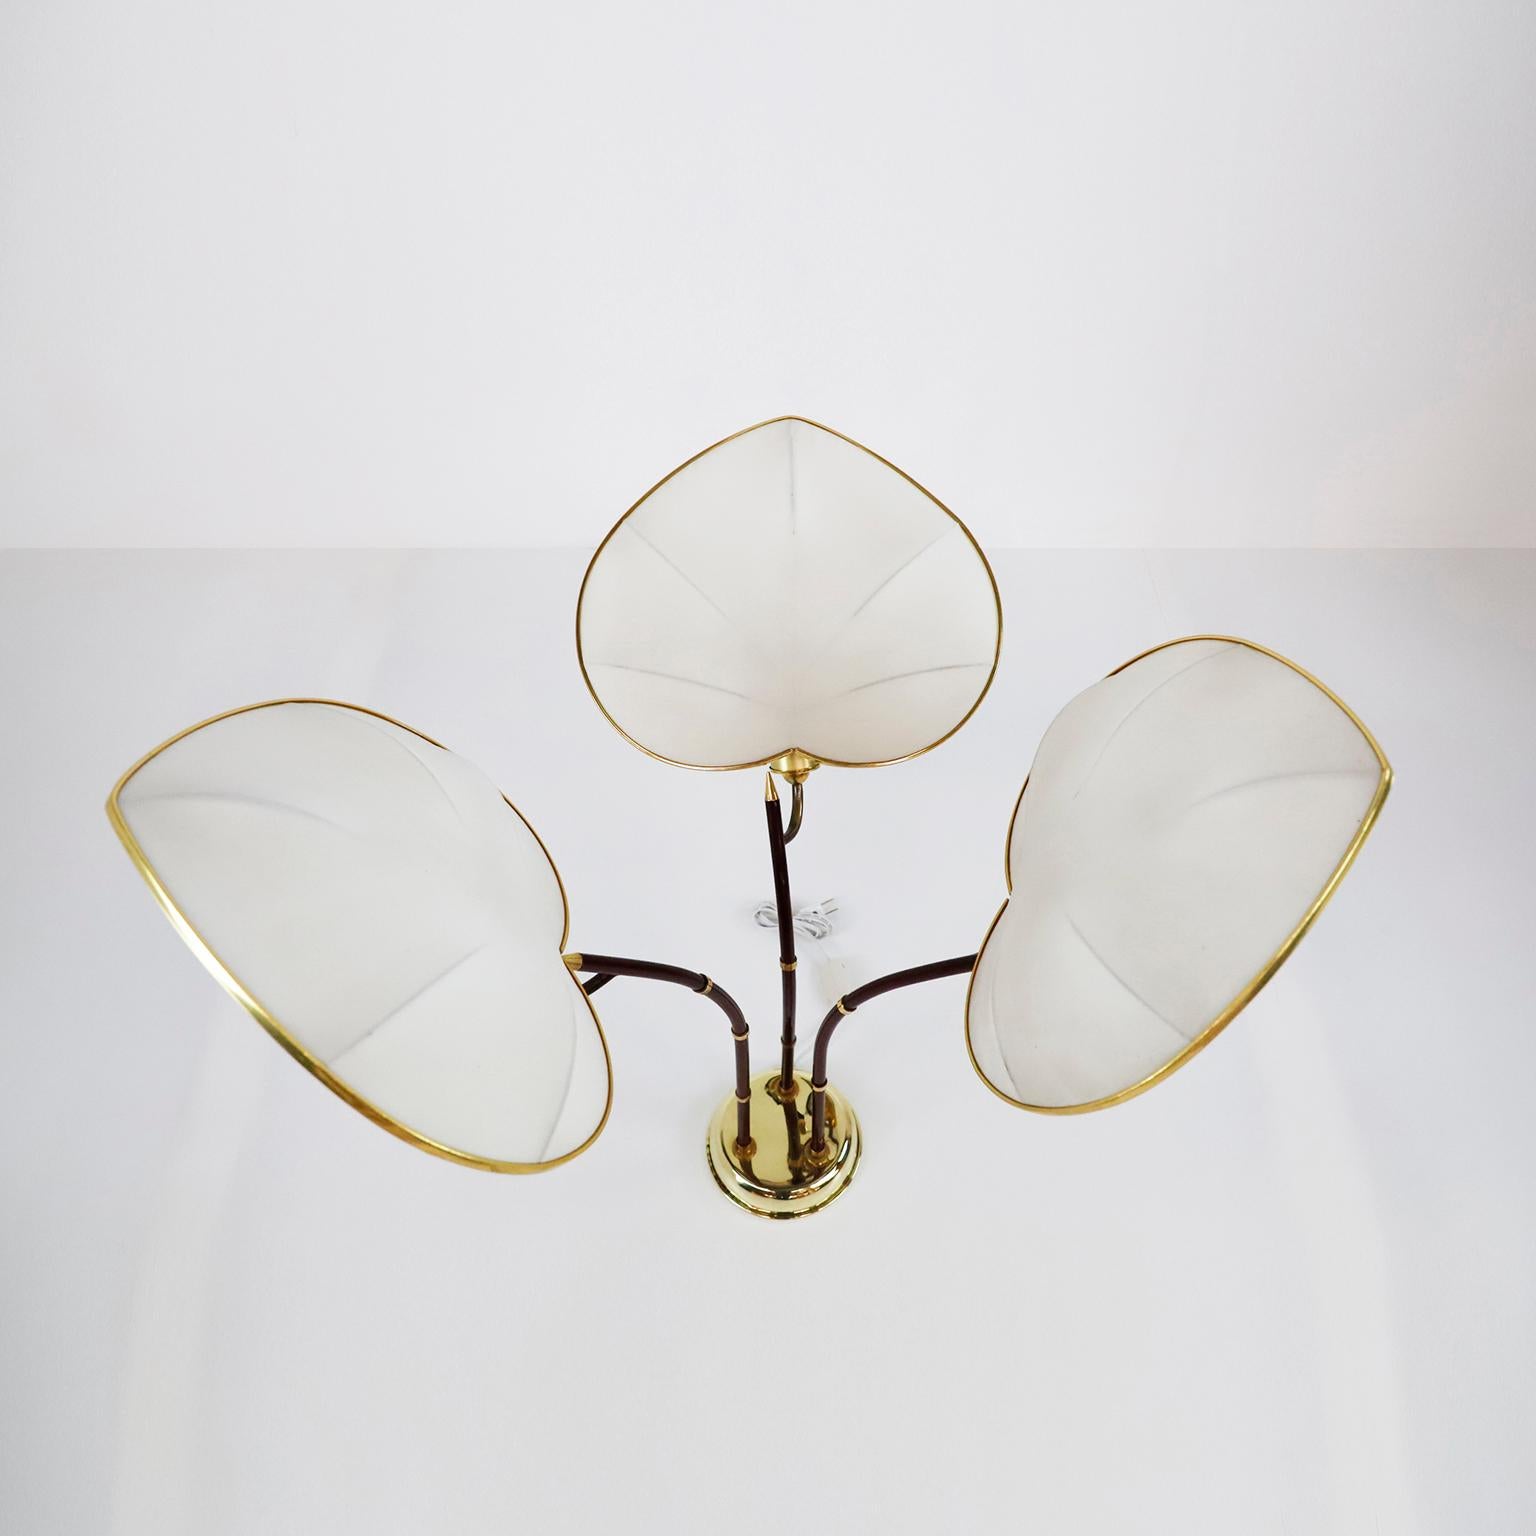 Circa 1960, We offer this Palm Tree Table Lamp designed by Arturo Pani. This lamp is perhaps one of the most whimsical of all the wonderful designs by Arturo Pani. Crafted of brass and tubular metal lacquered in a wine color, the angle of the stems